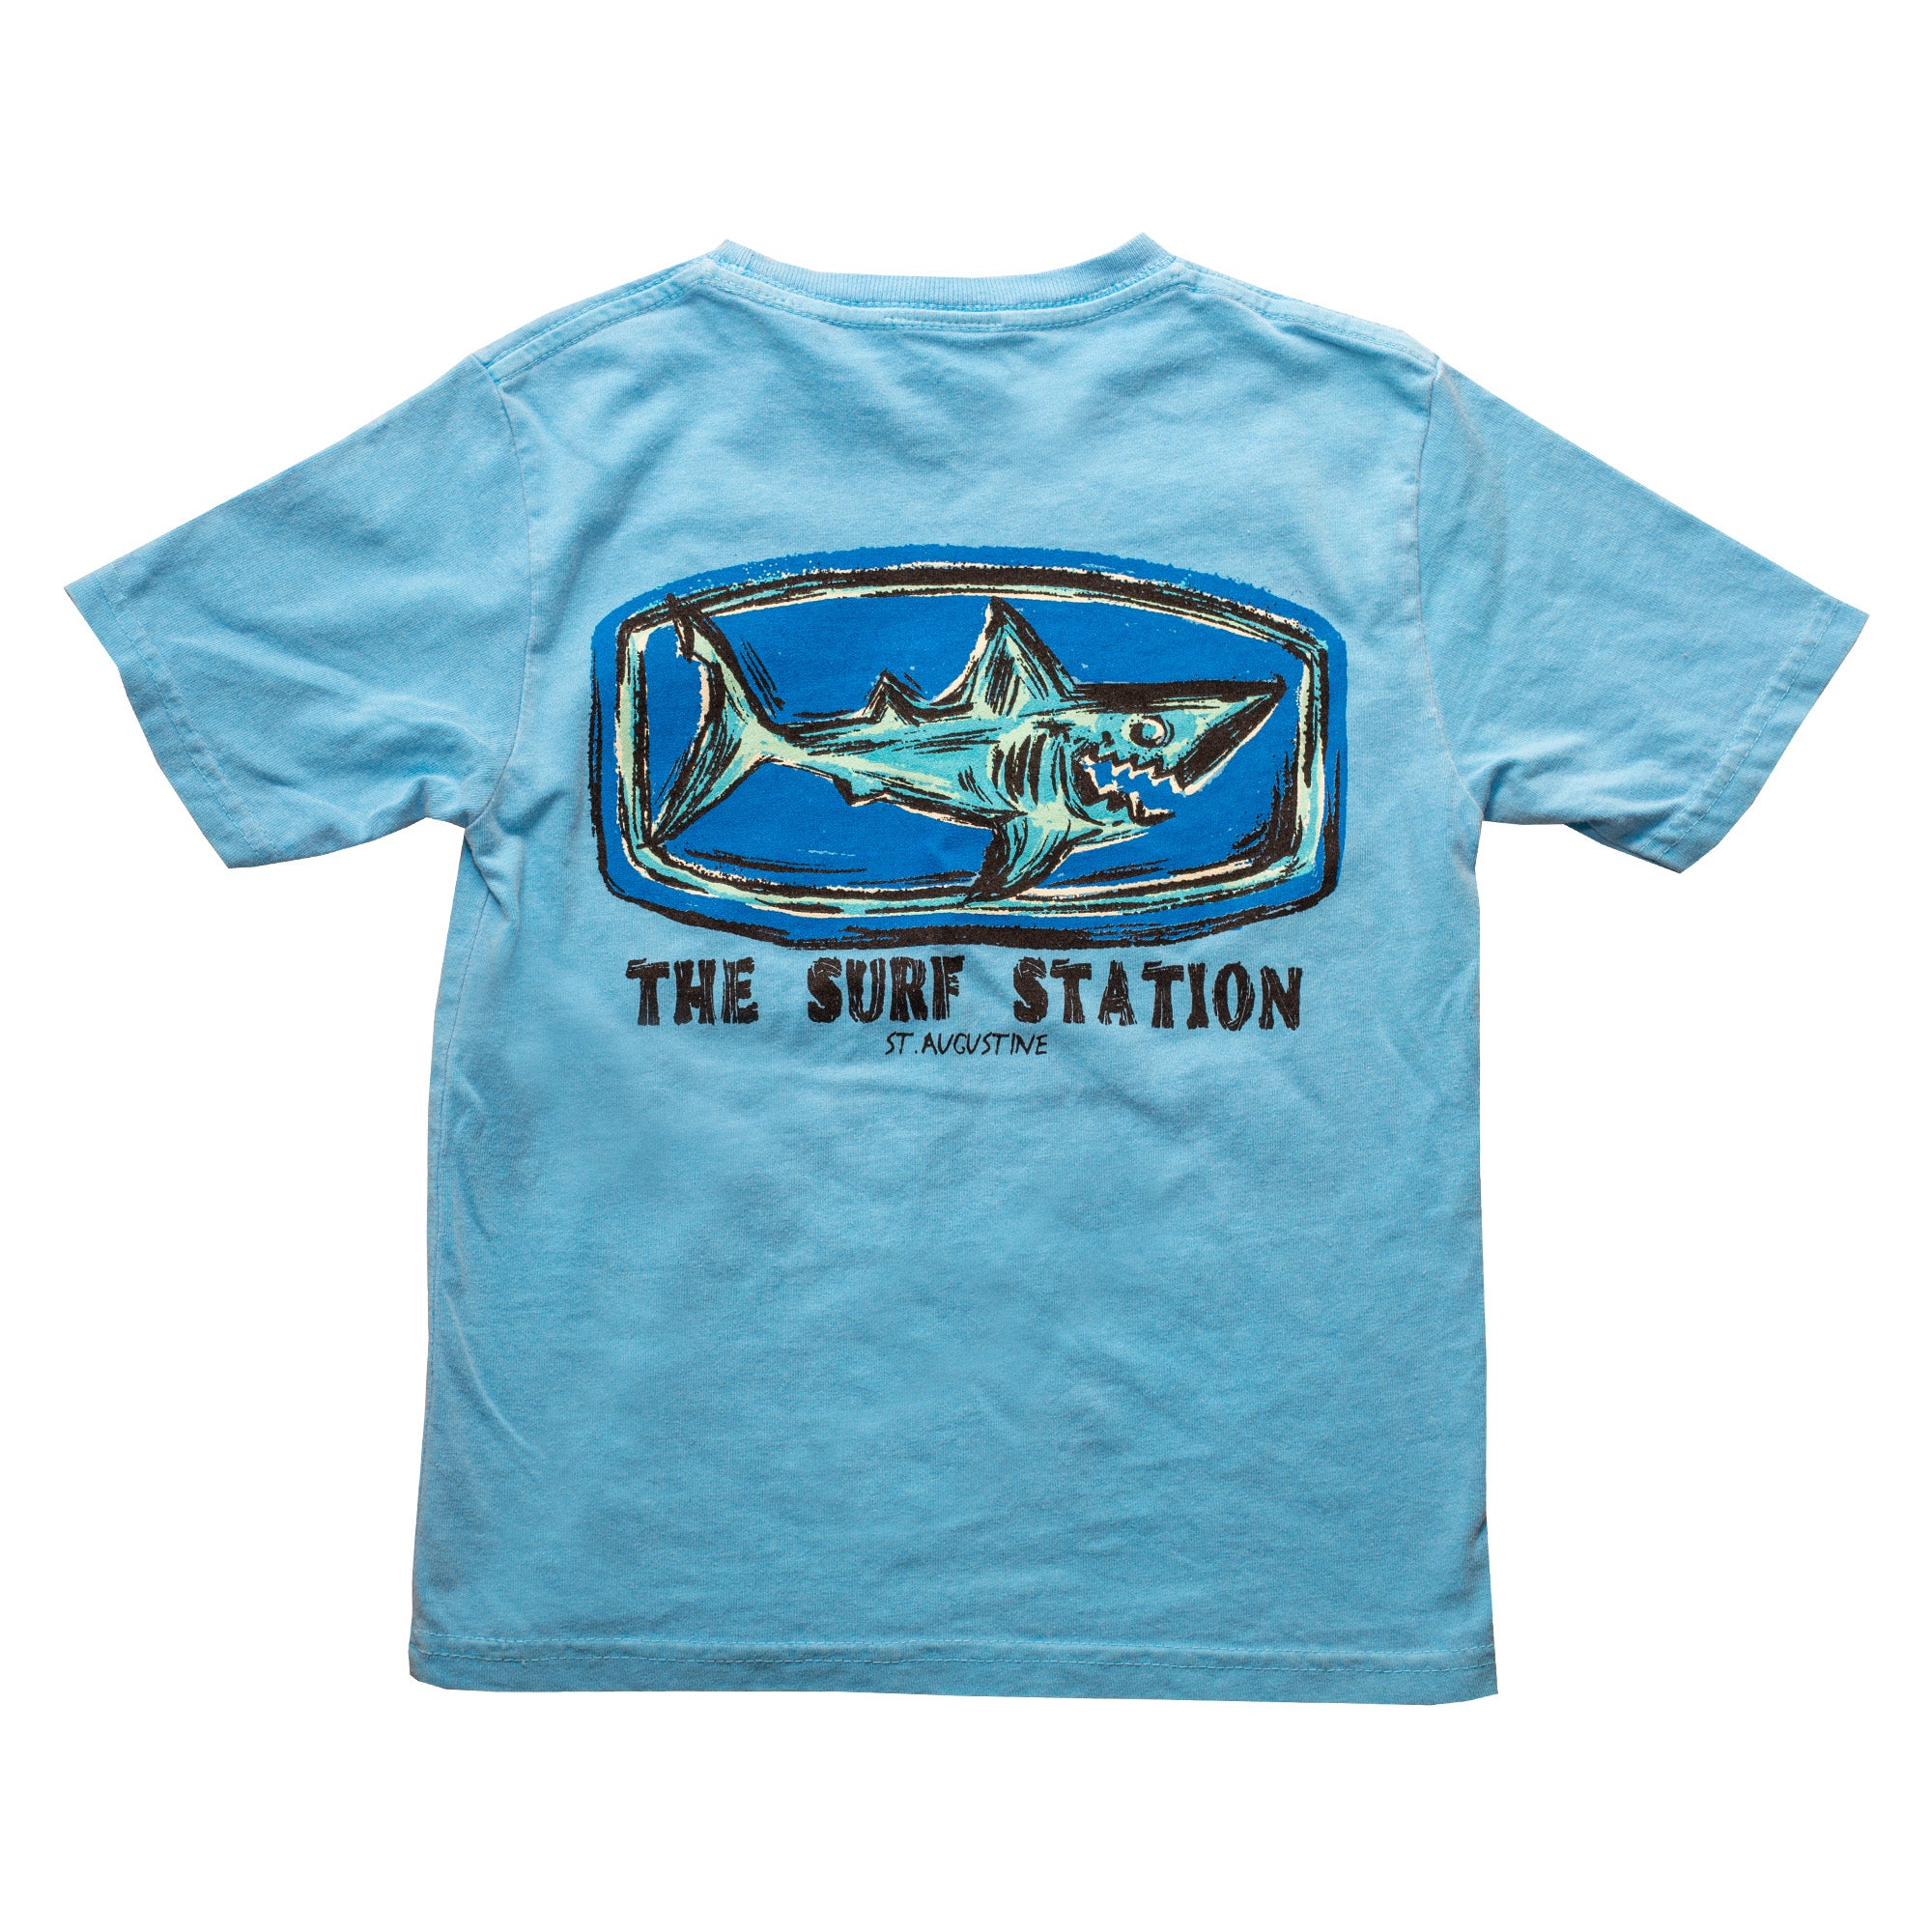 Surf Station Lil Yachty Shark Youth Boy's S/S T-Shirt